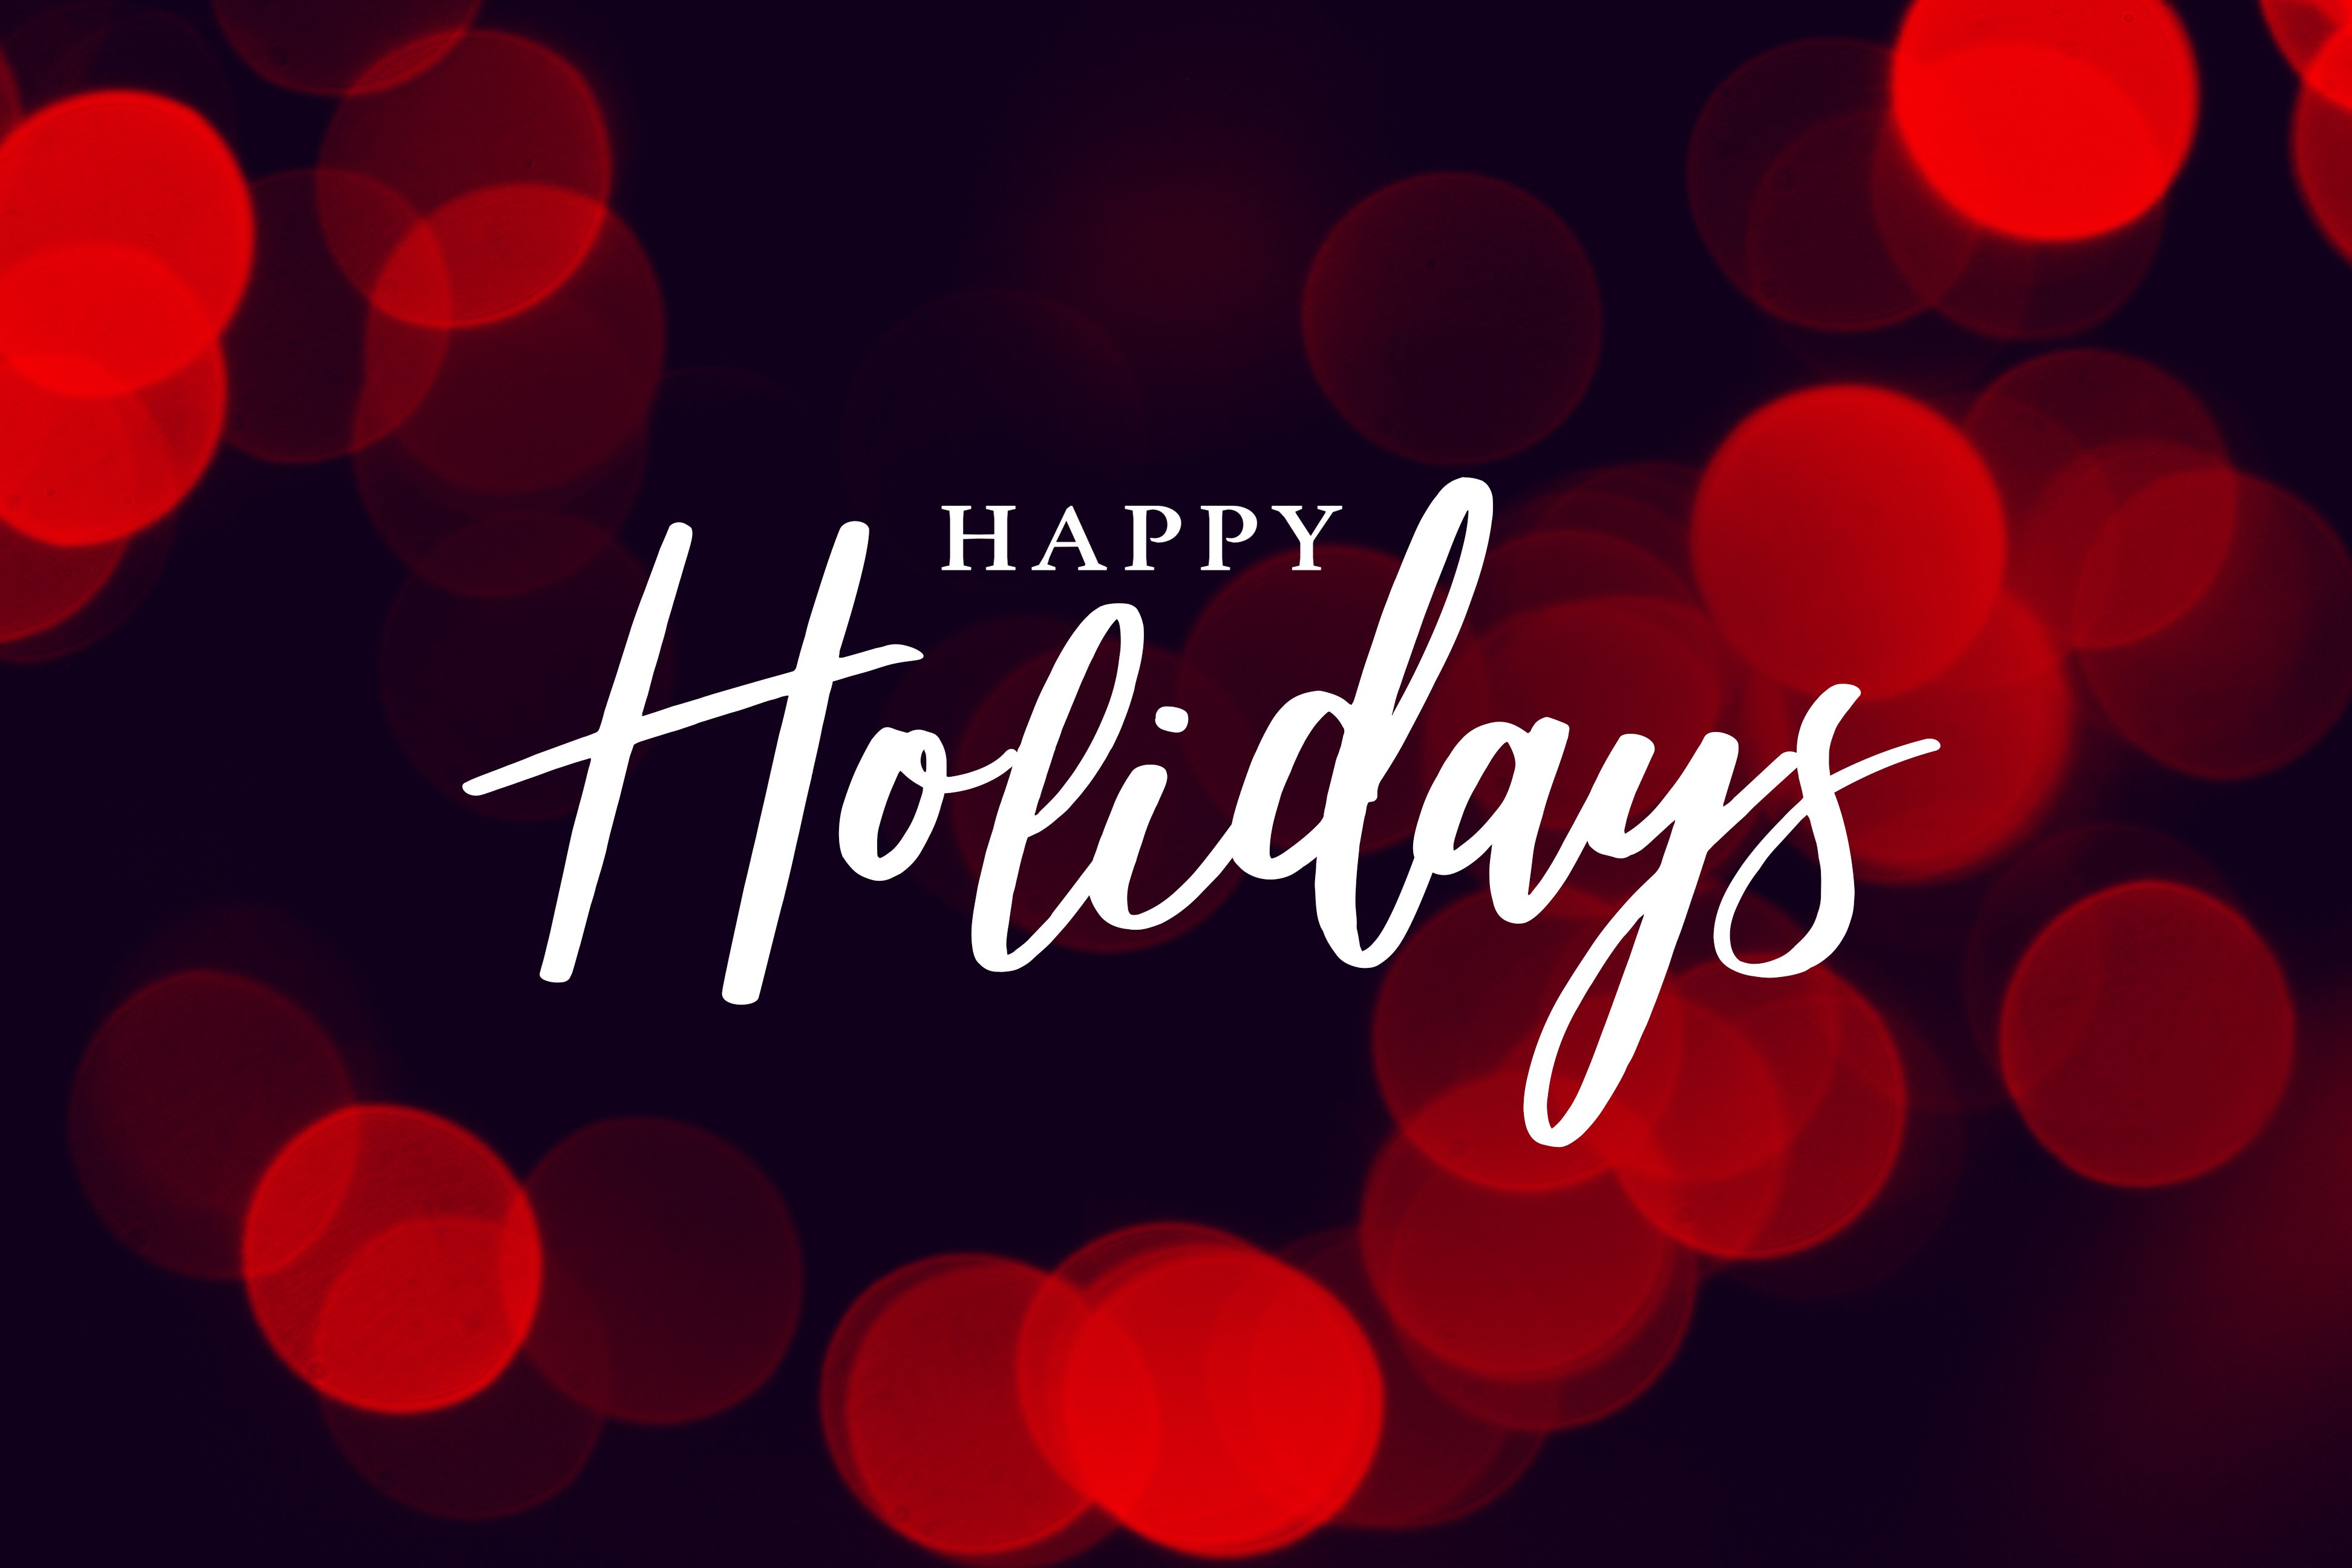 Happy Holidays from ICCG-1